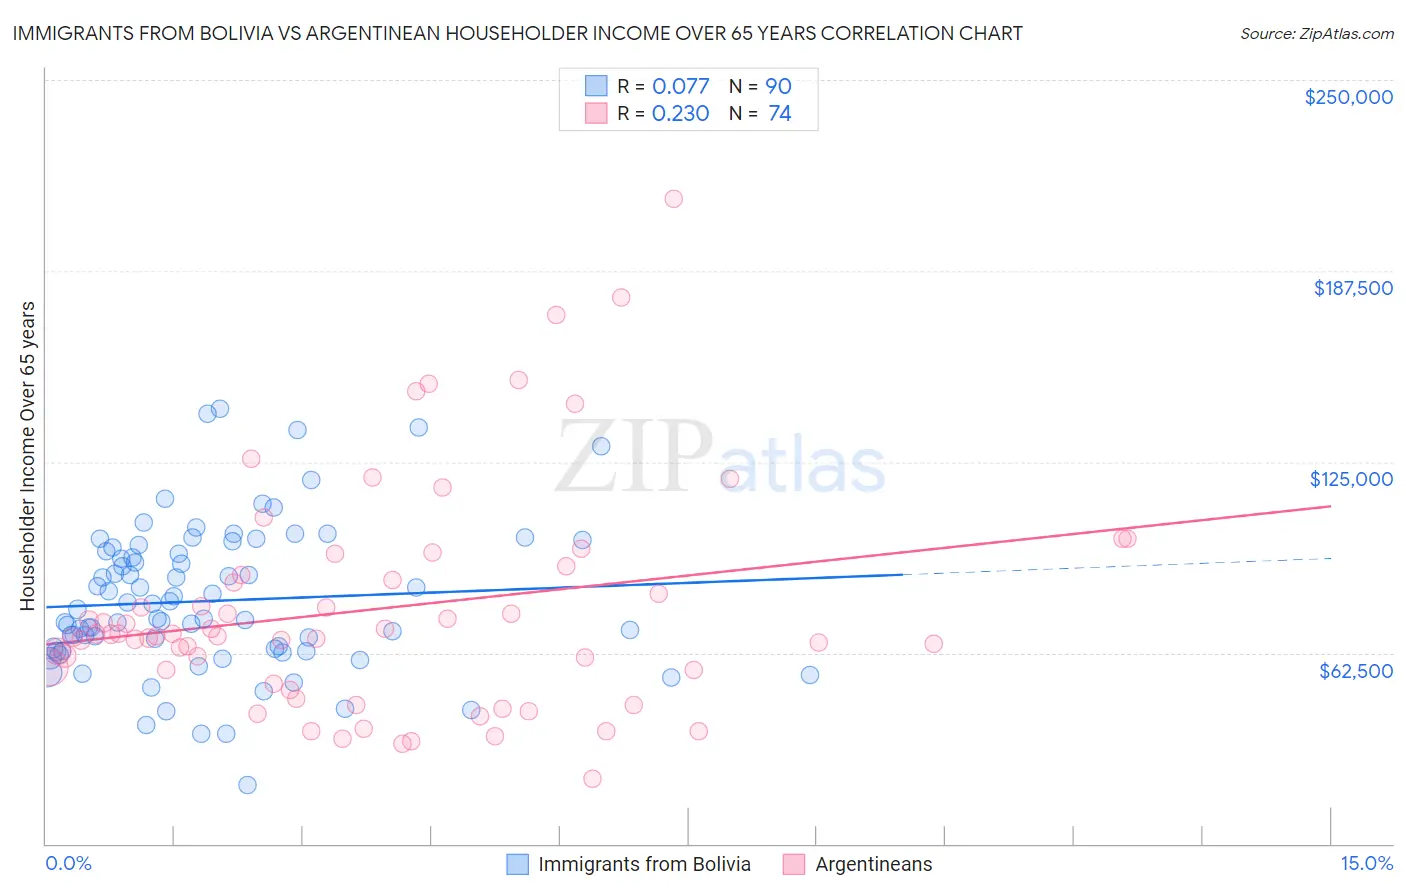 Immigrants from Bolivia vs Argentinean Householder Income Over 65 years